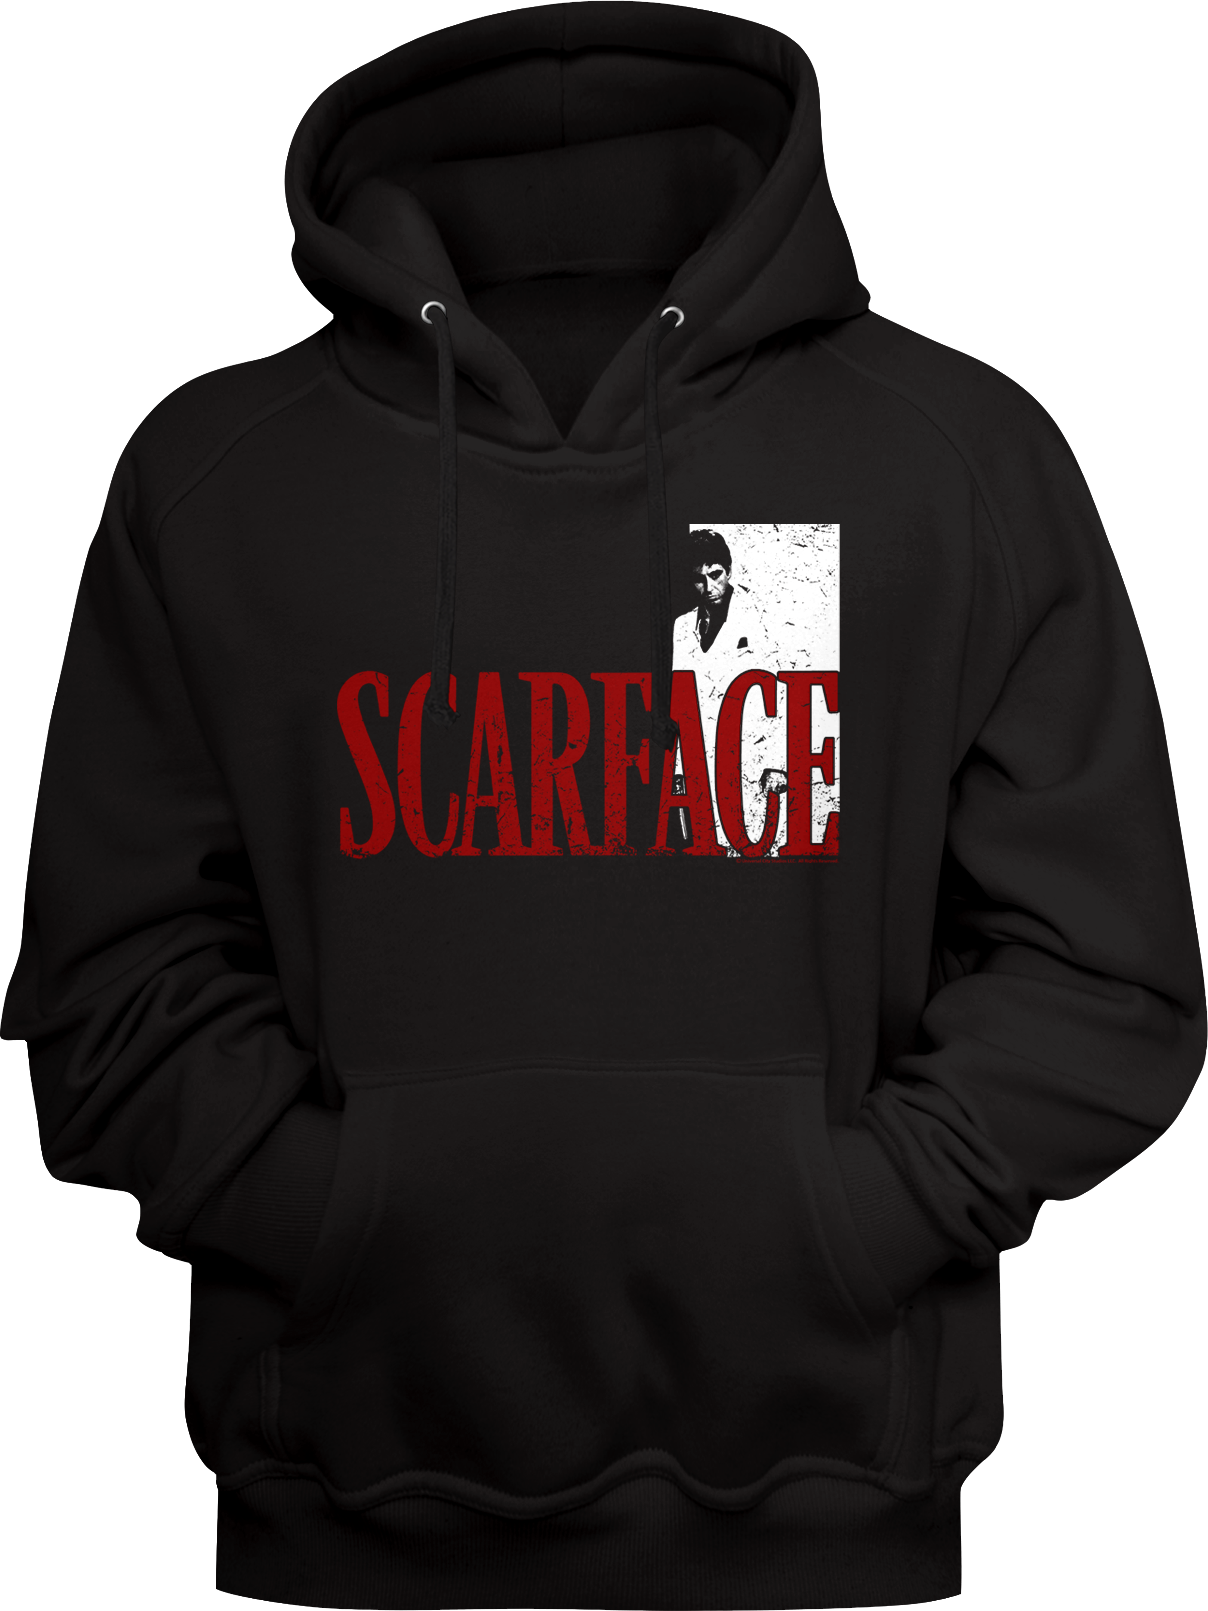 Movie Poster Scarface Hoodie